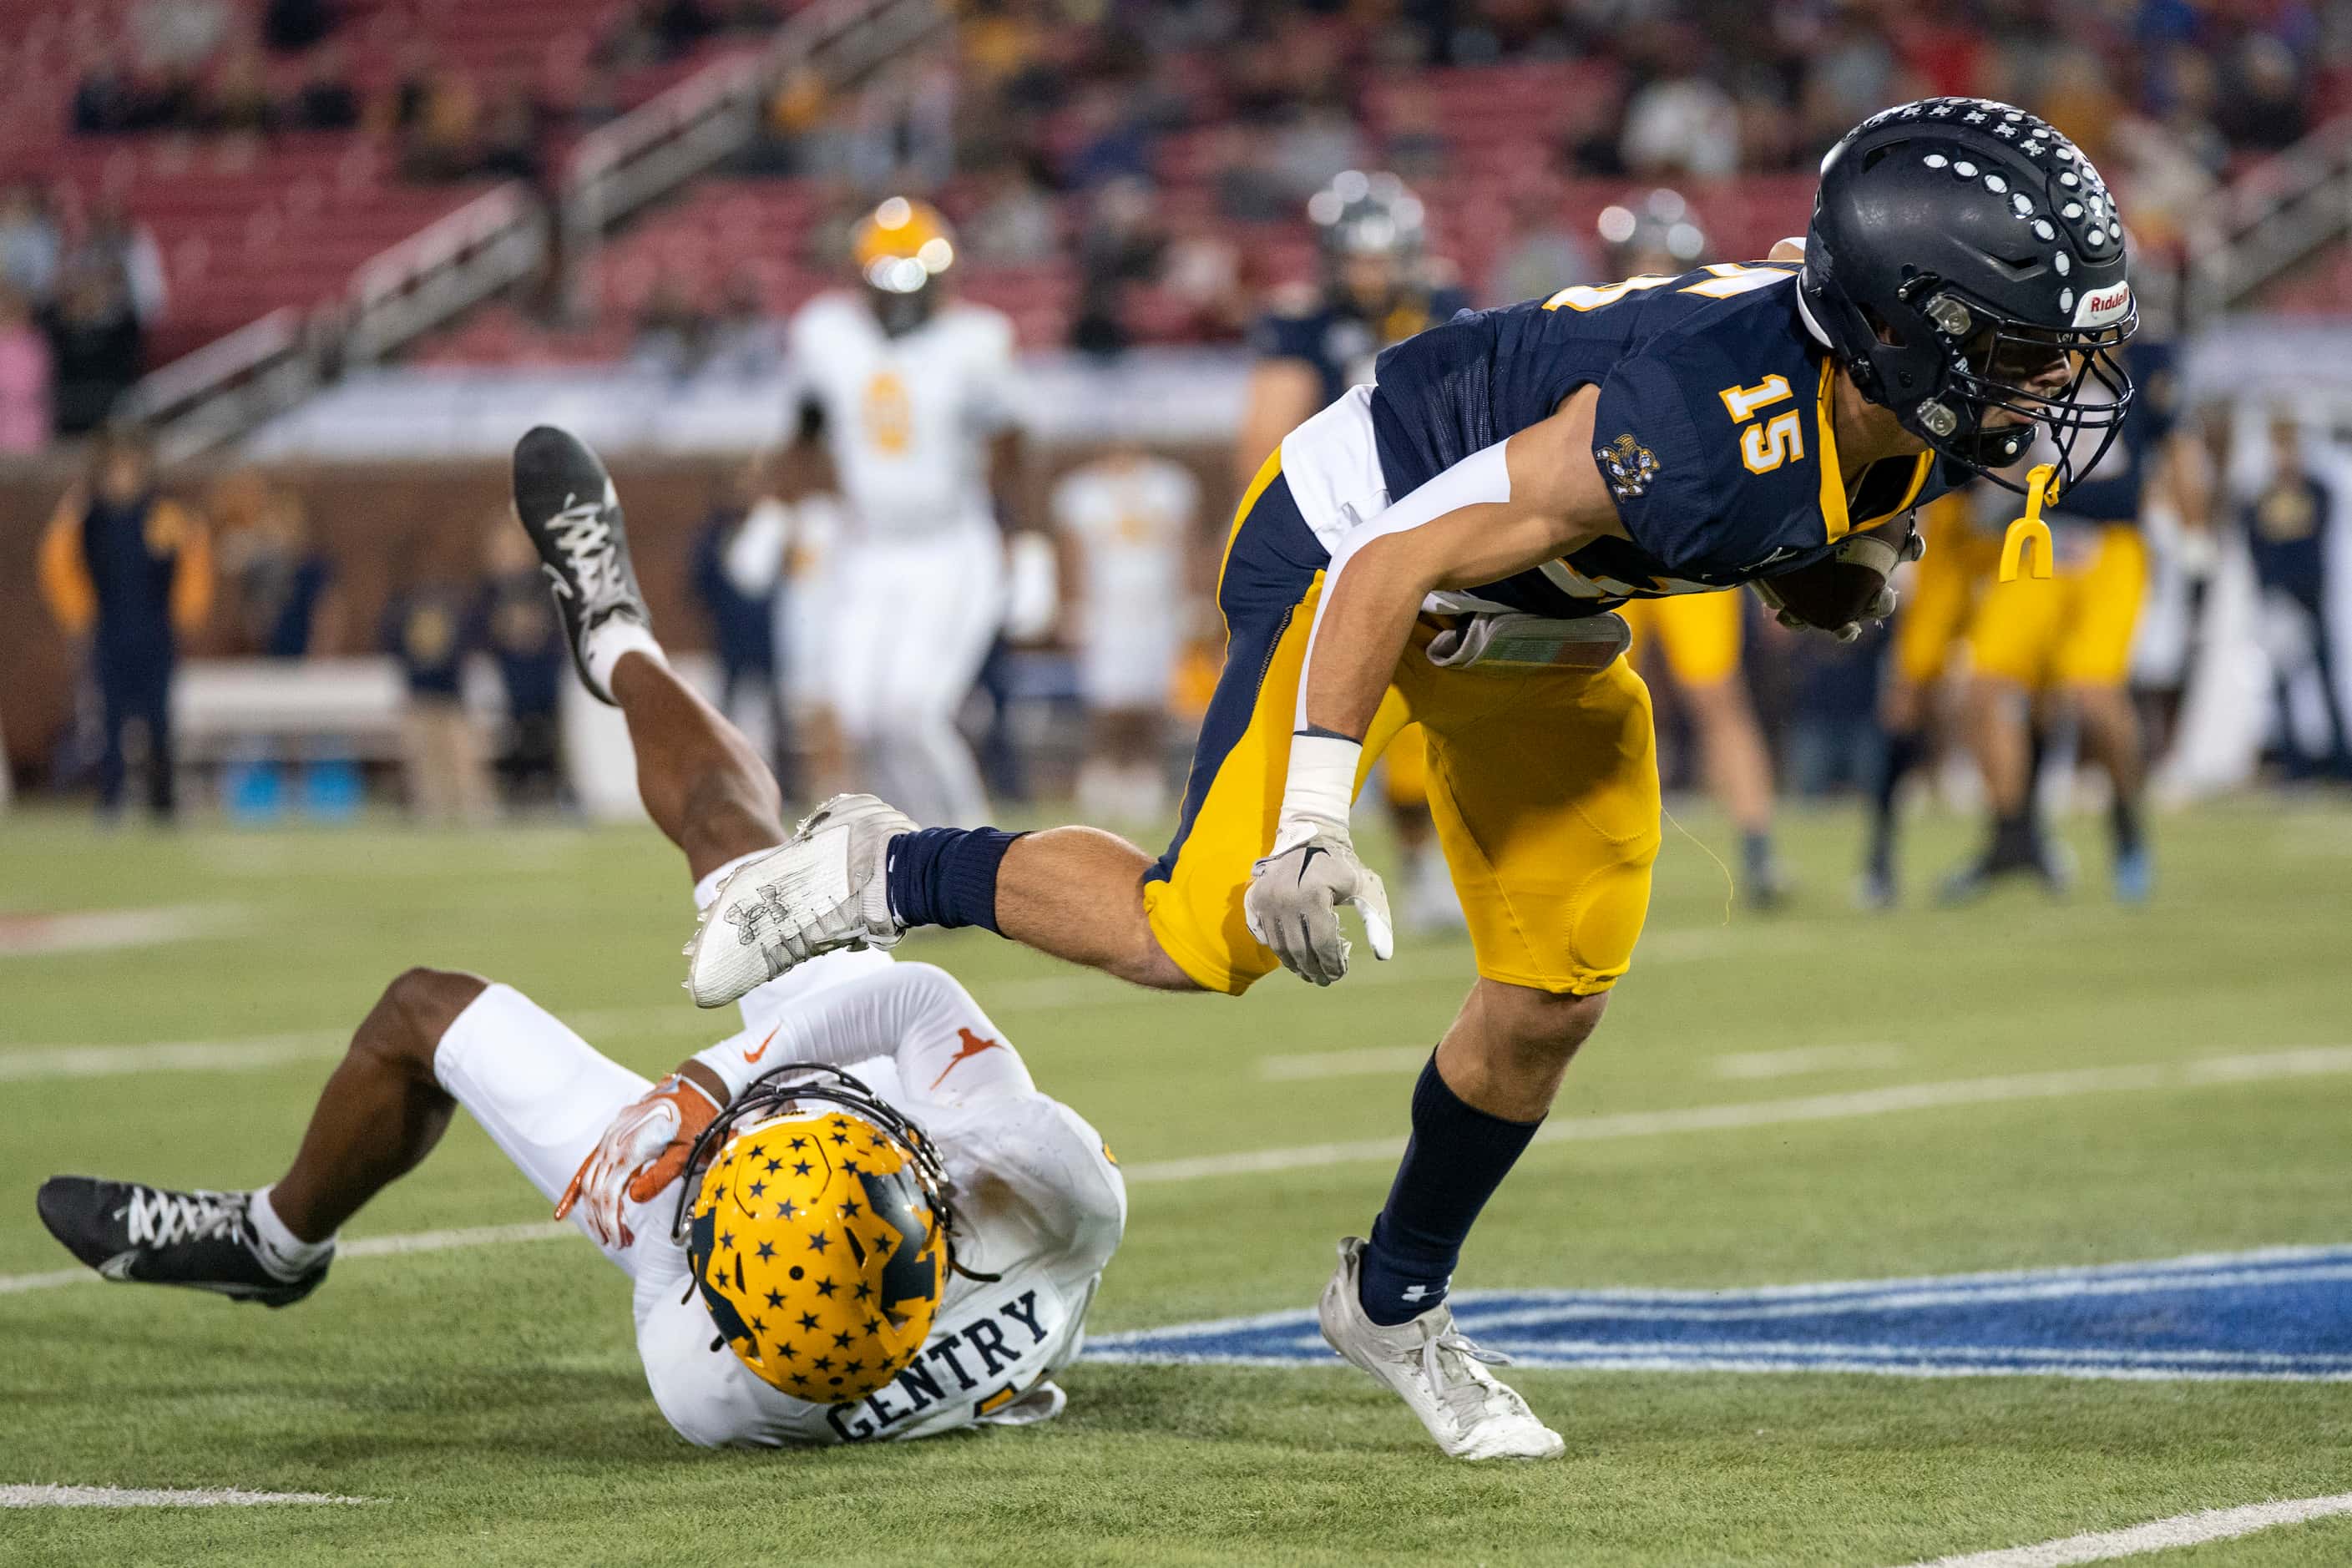 Highland Park junior wide receiver Bryce Laczkowski (15) breaks the tackle of McKinney...